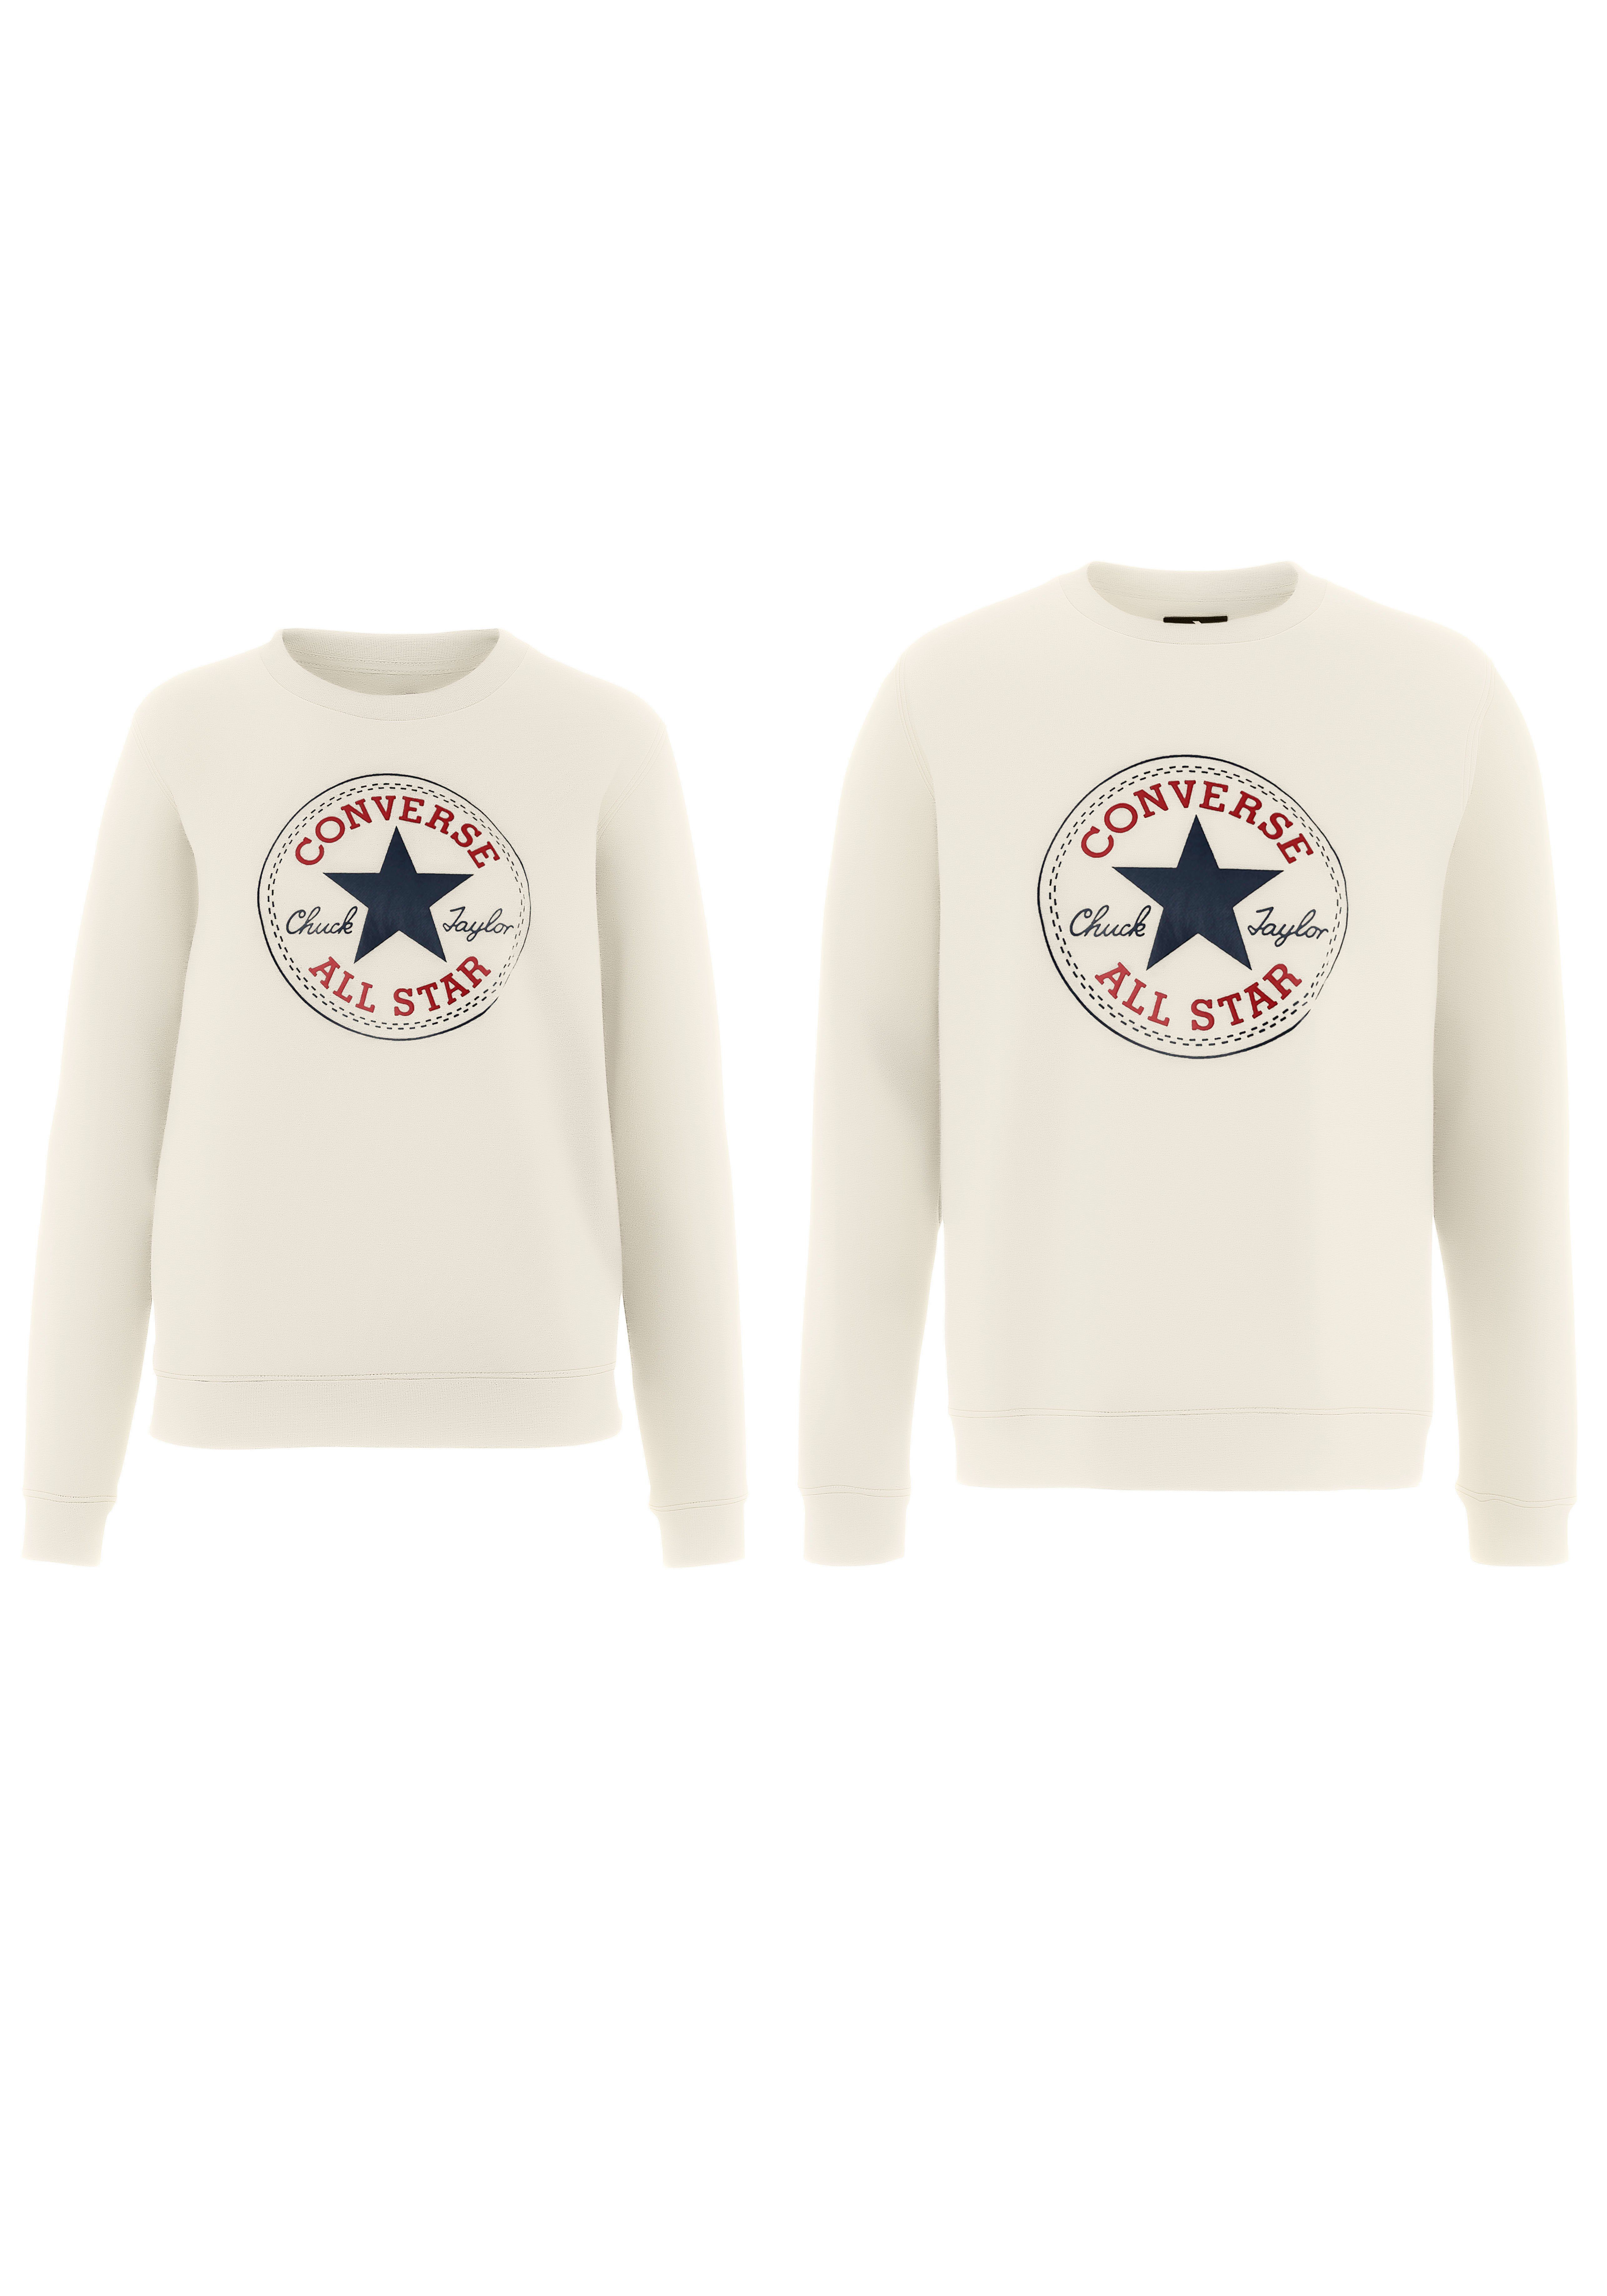 Sweatshirt EGR UNISEX BACK BRUSHED STAR ALL PATCH Converse